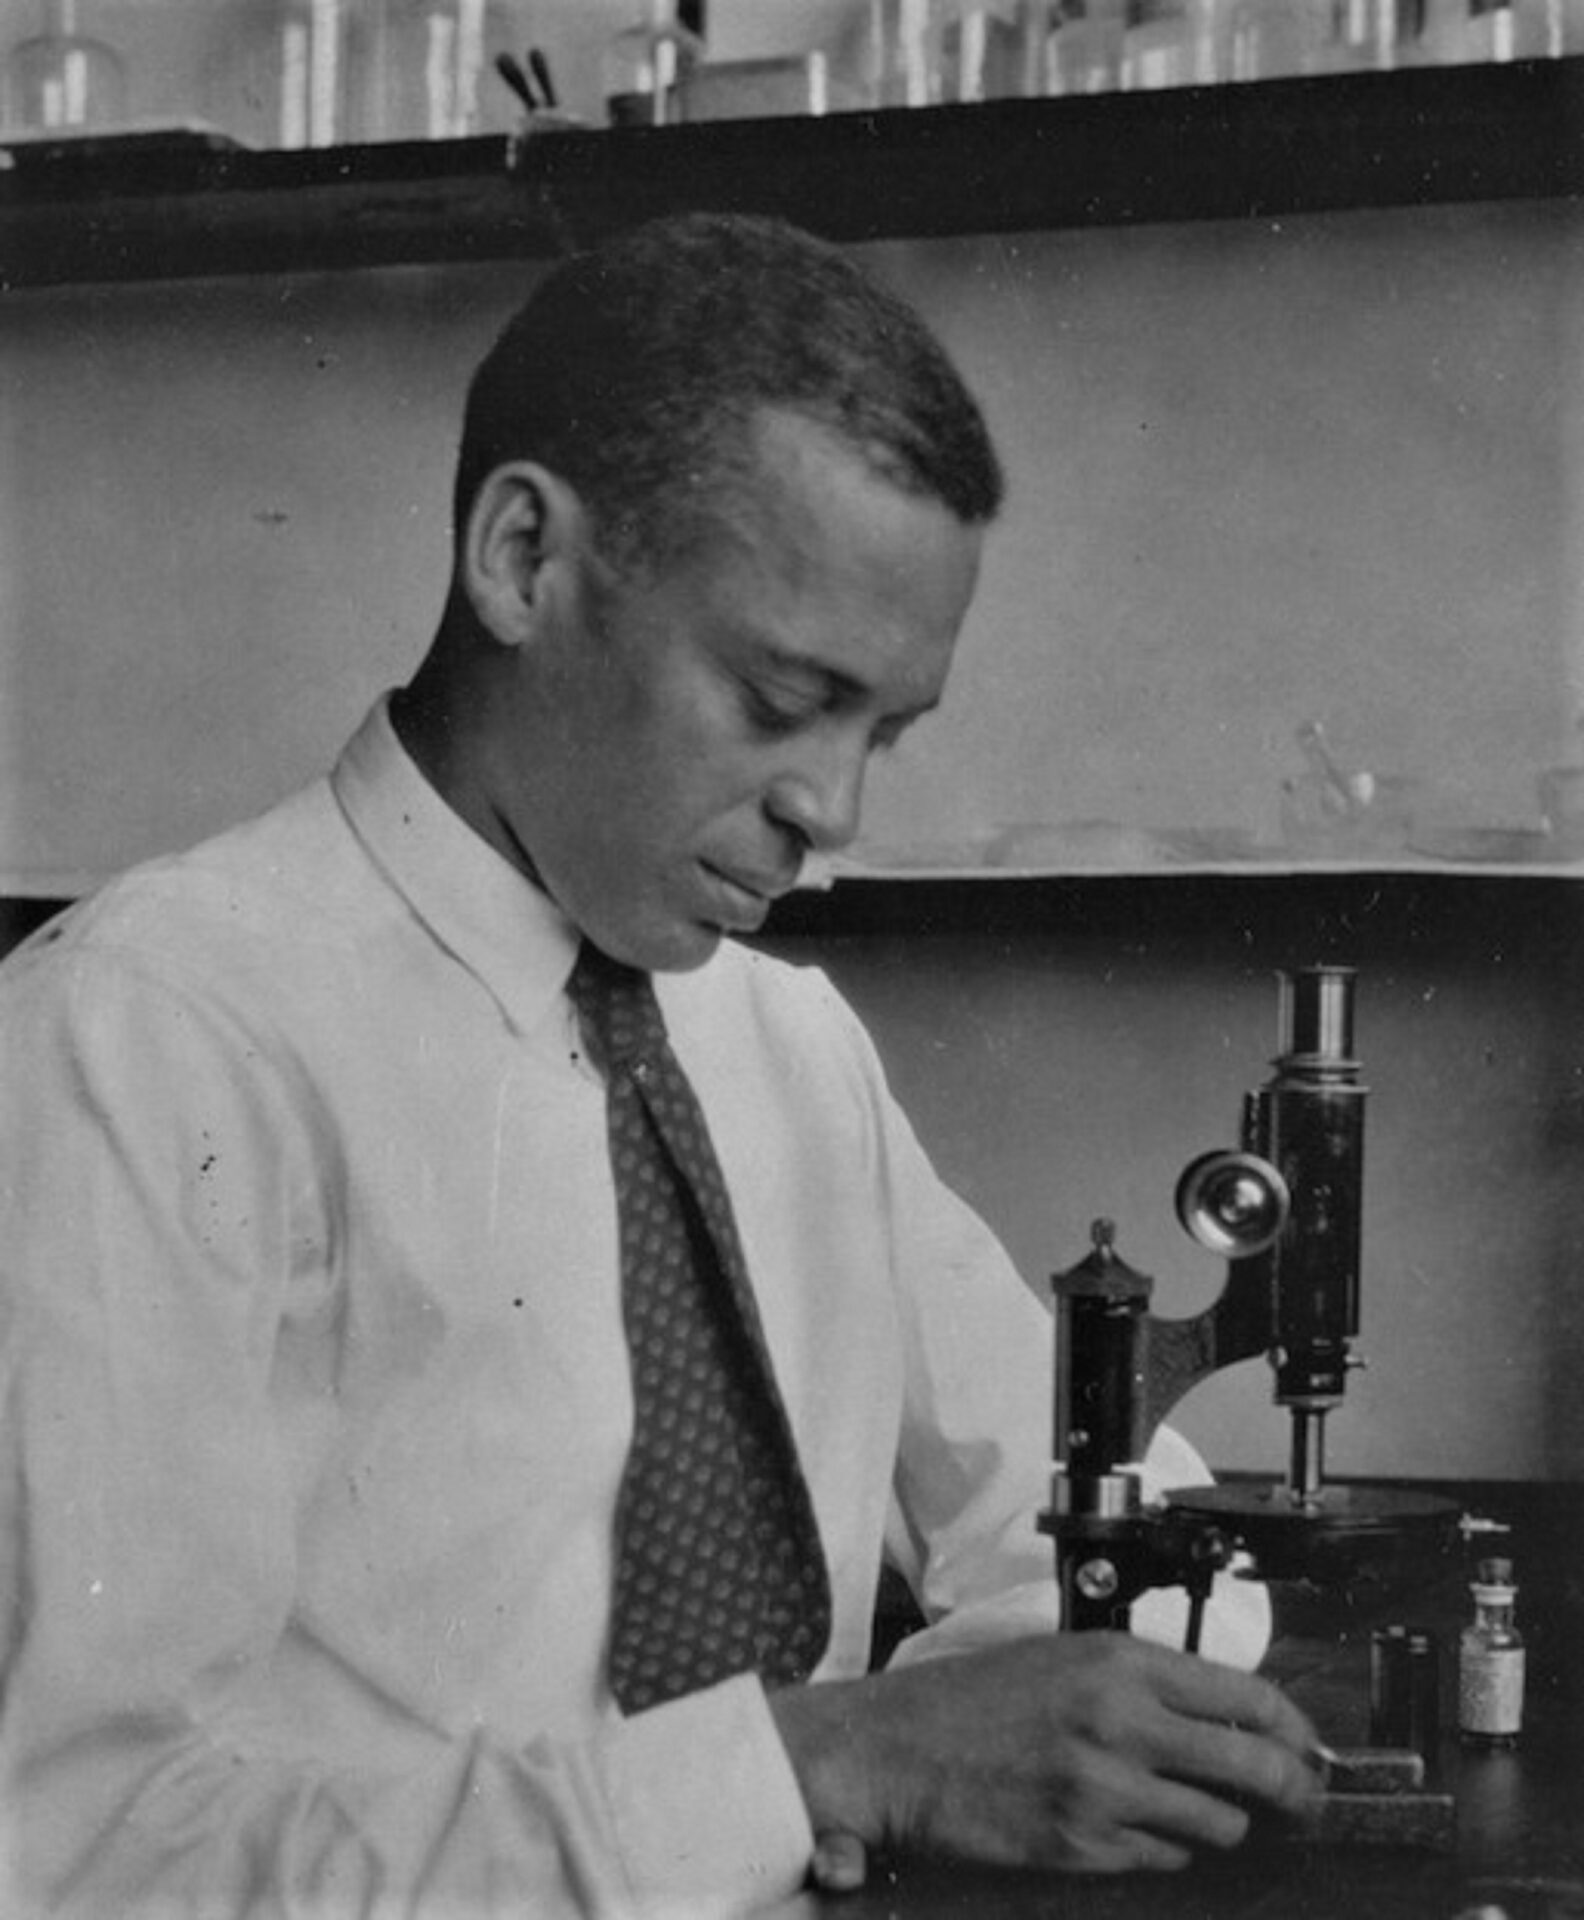 A man looking at a microscope